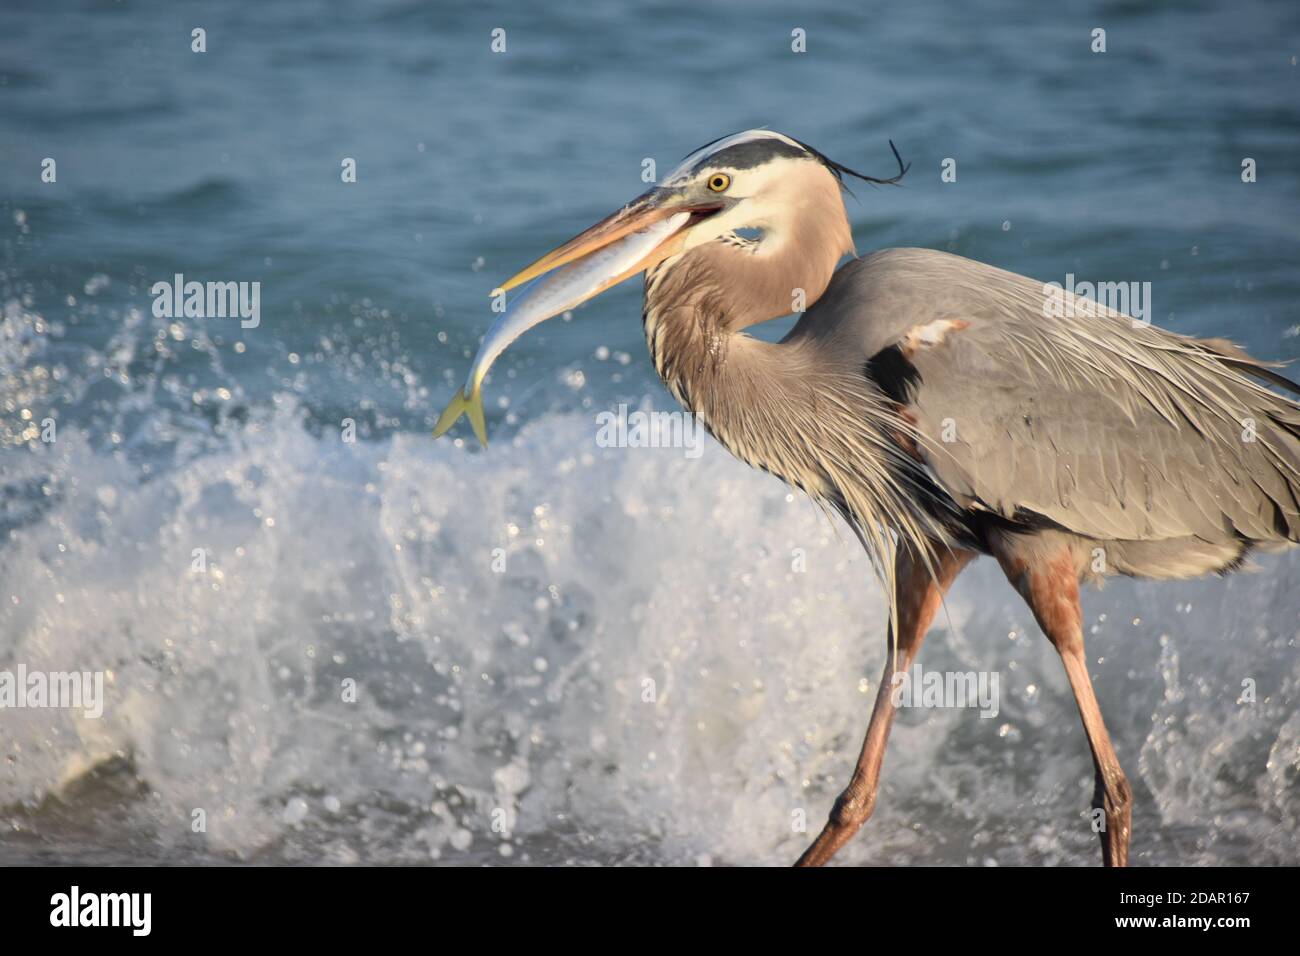 Capturing a heron catching lunch while out on a walk along the beach on Anna Maria Island, Florida. Stock Photo